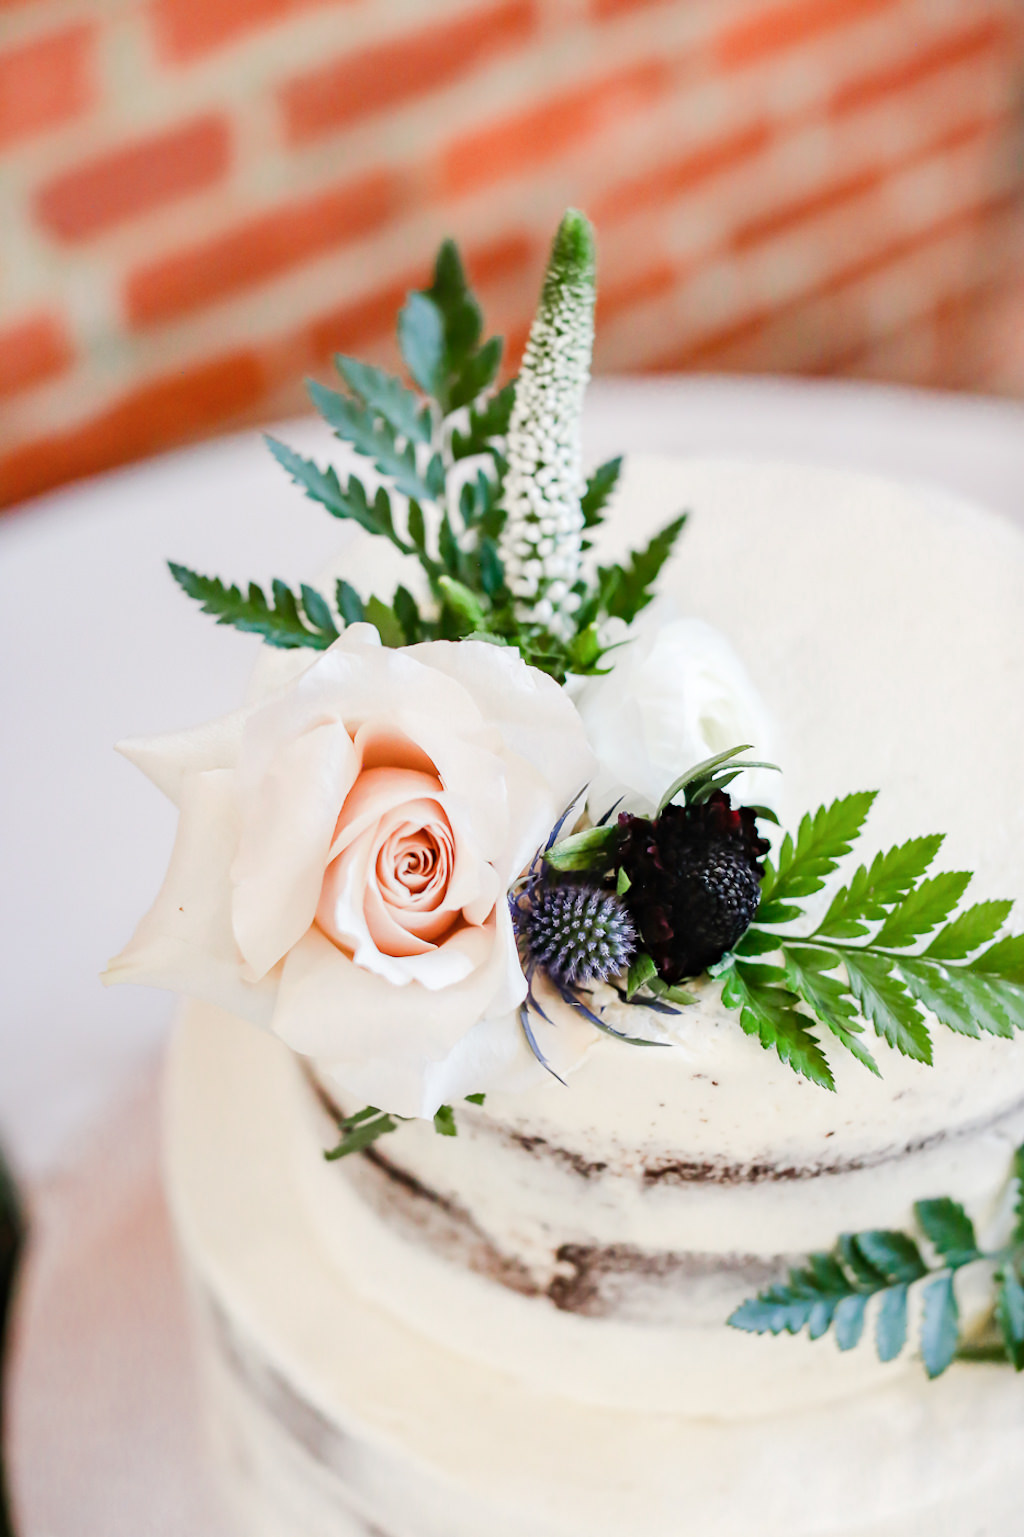 Two Tier Semi Naked White Buttercream Wedding Cake with Blush Pink Rose, Greenery and Blue Thistle Floral Cake Topper | Tampa Bay Wedding Photographer Lifelong Photography Studio | Wedding Planner Special Moments Event Planning